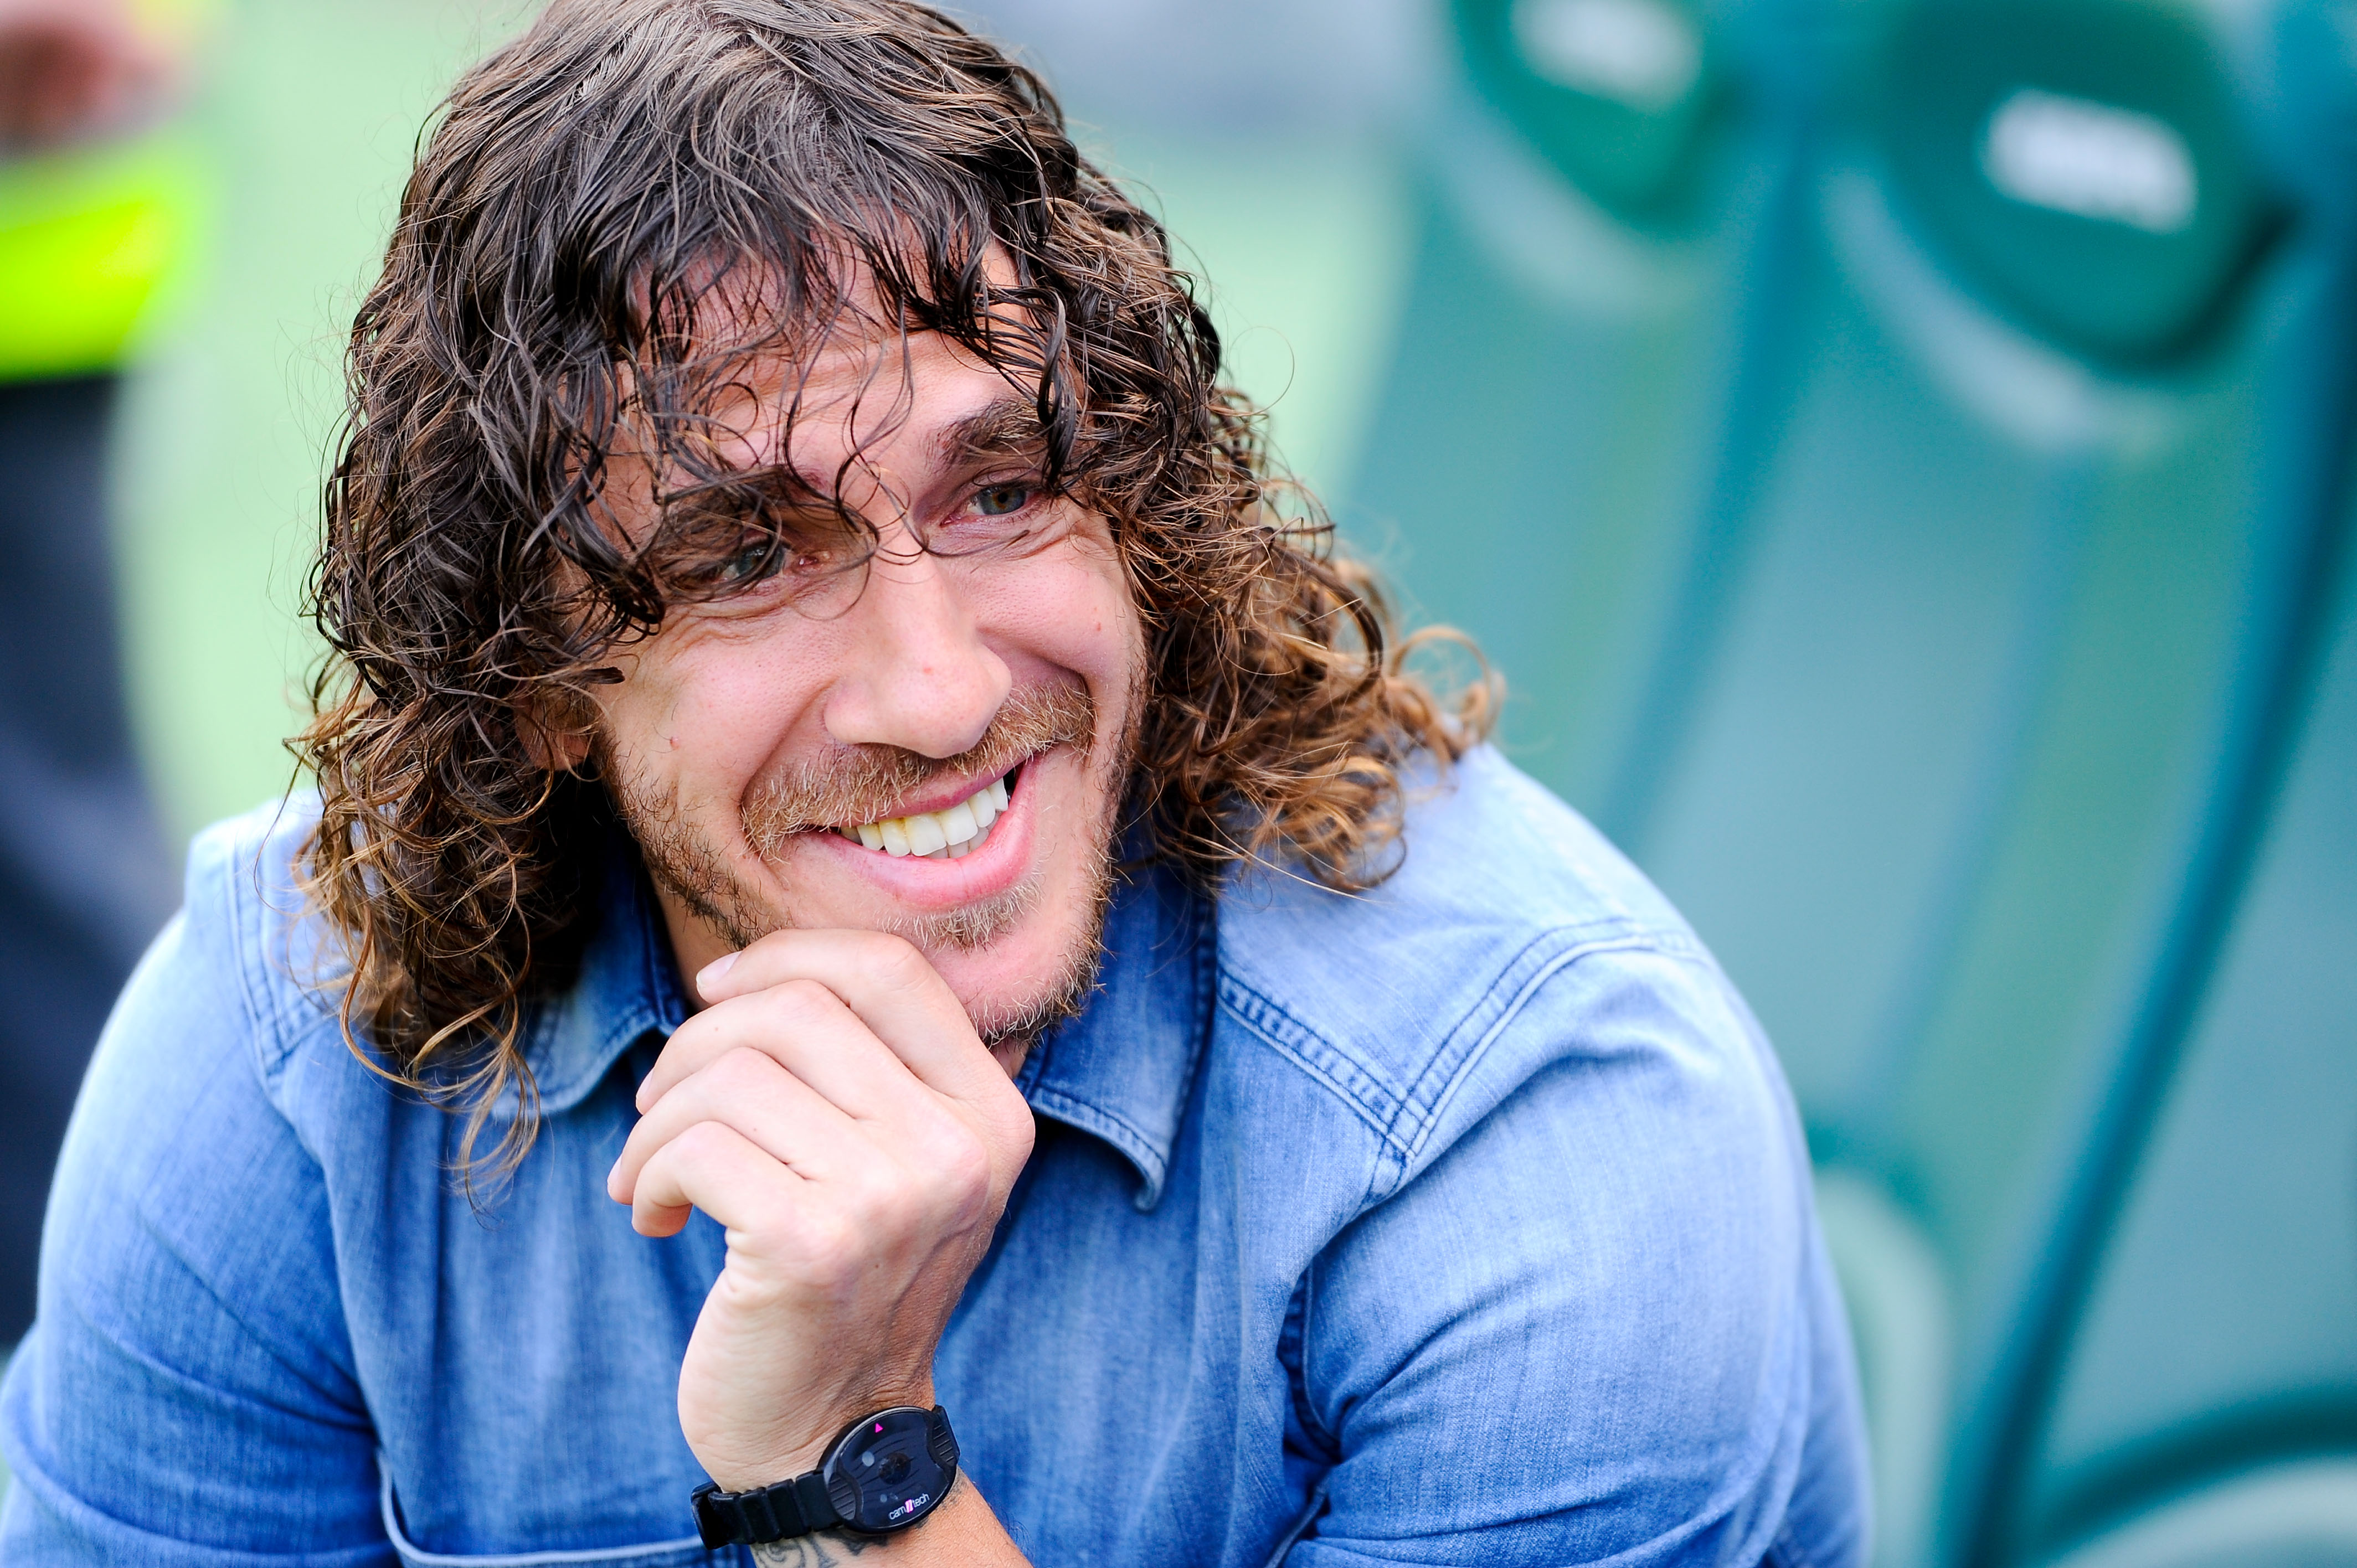 Puyol: “Mancini’s offer surprised me and made me proud”